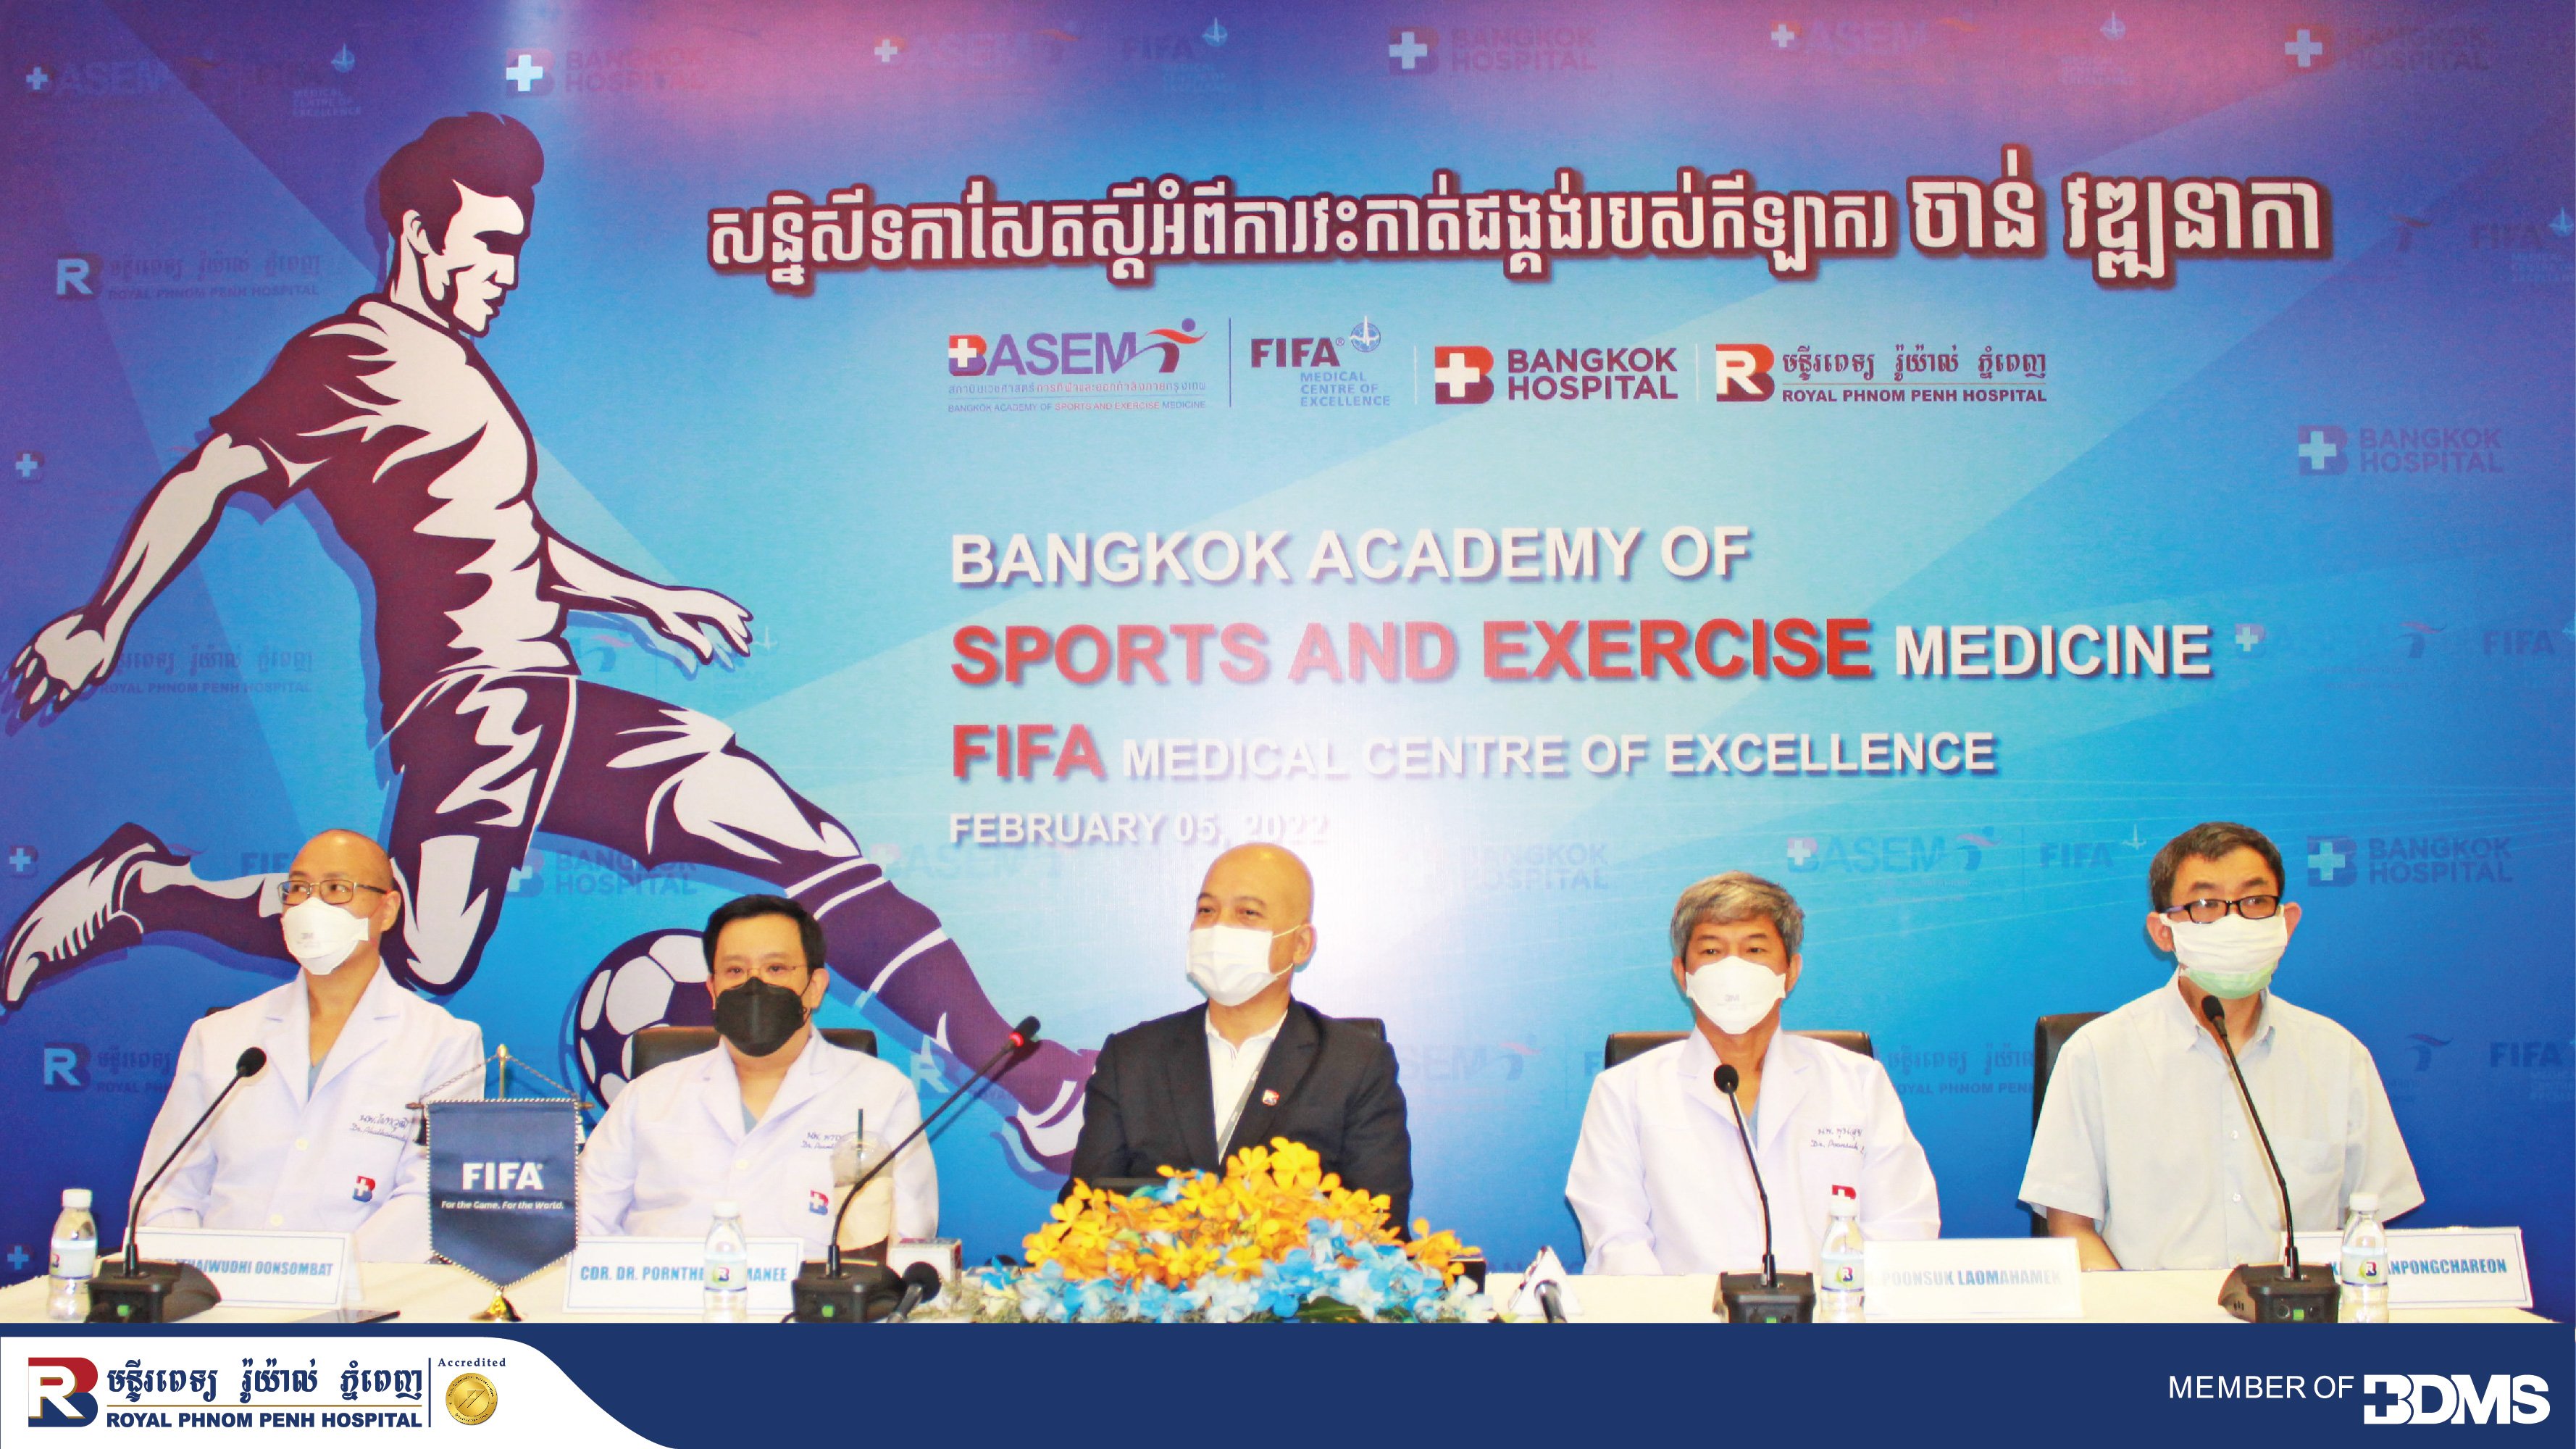 Mr. Chan vathanaka ACL press release